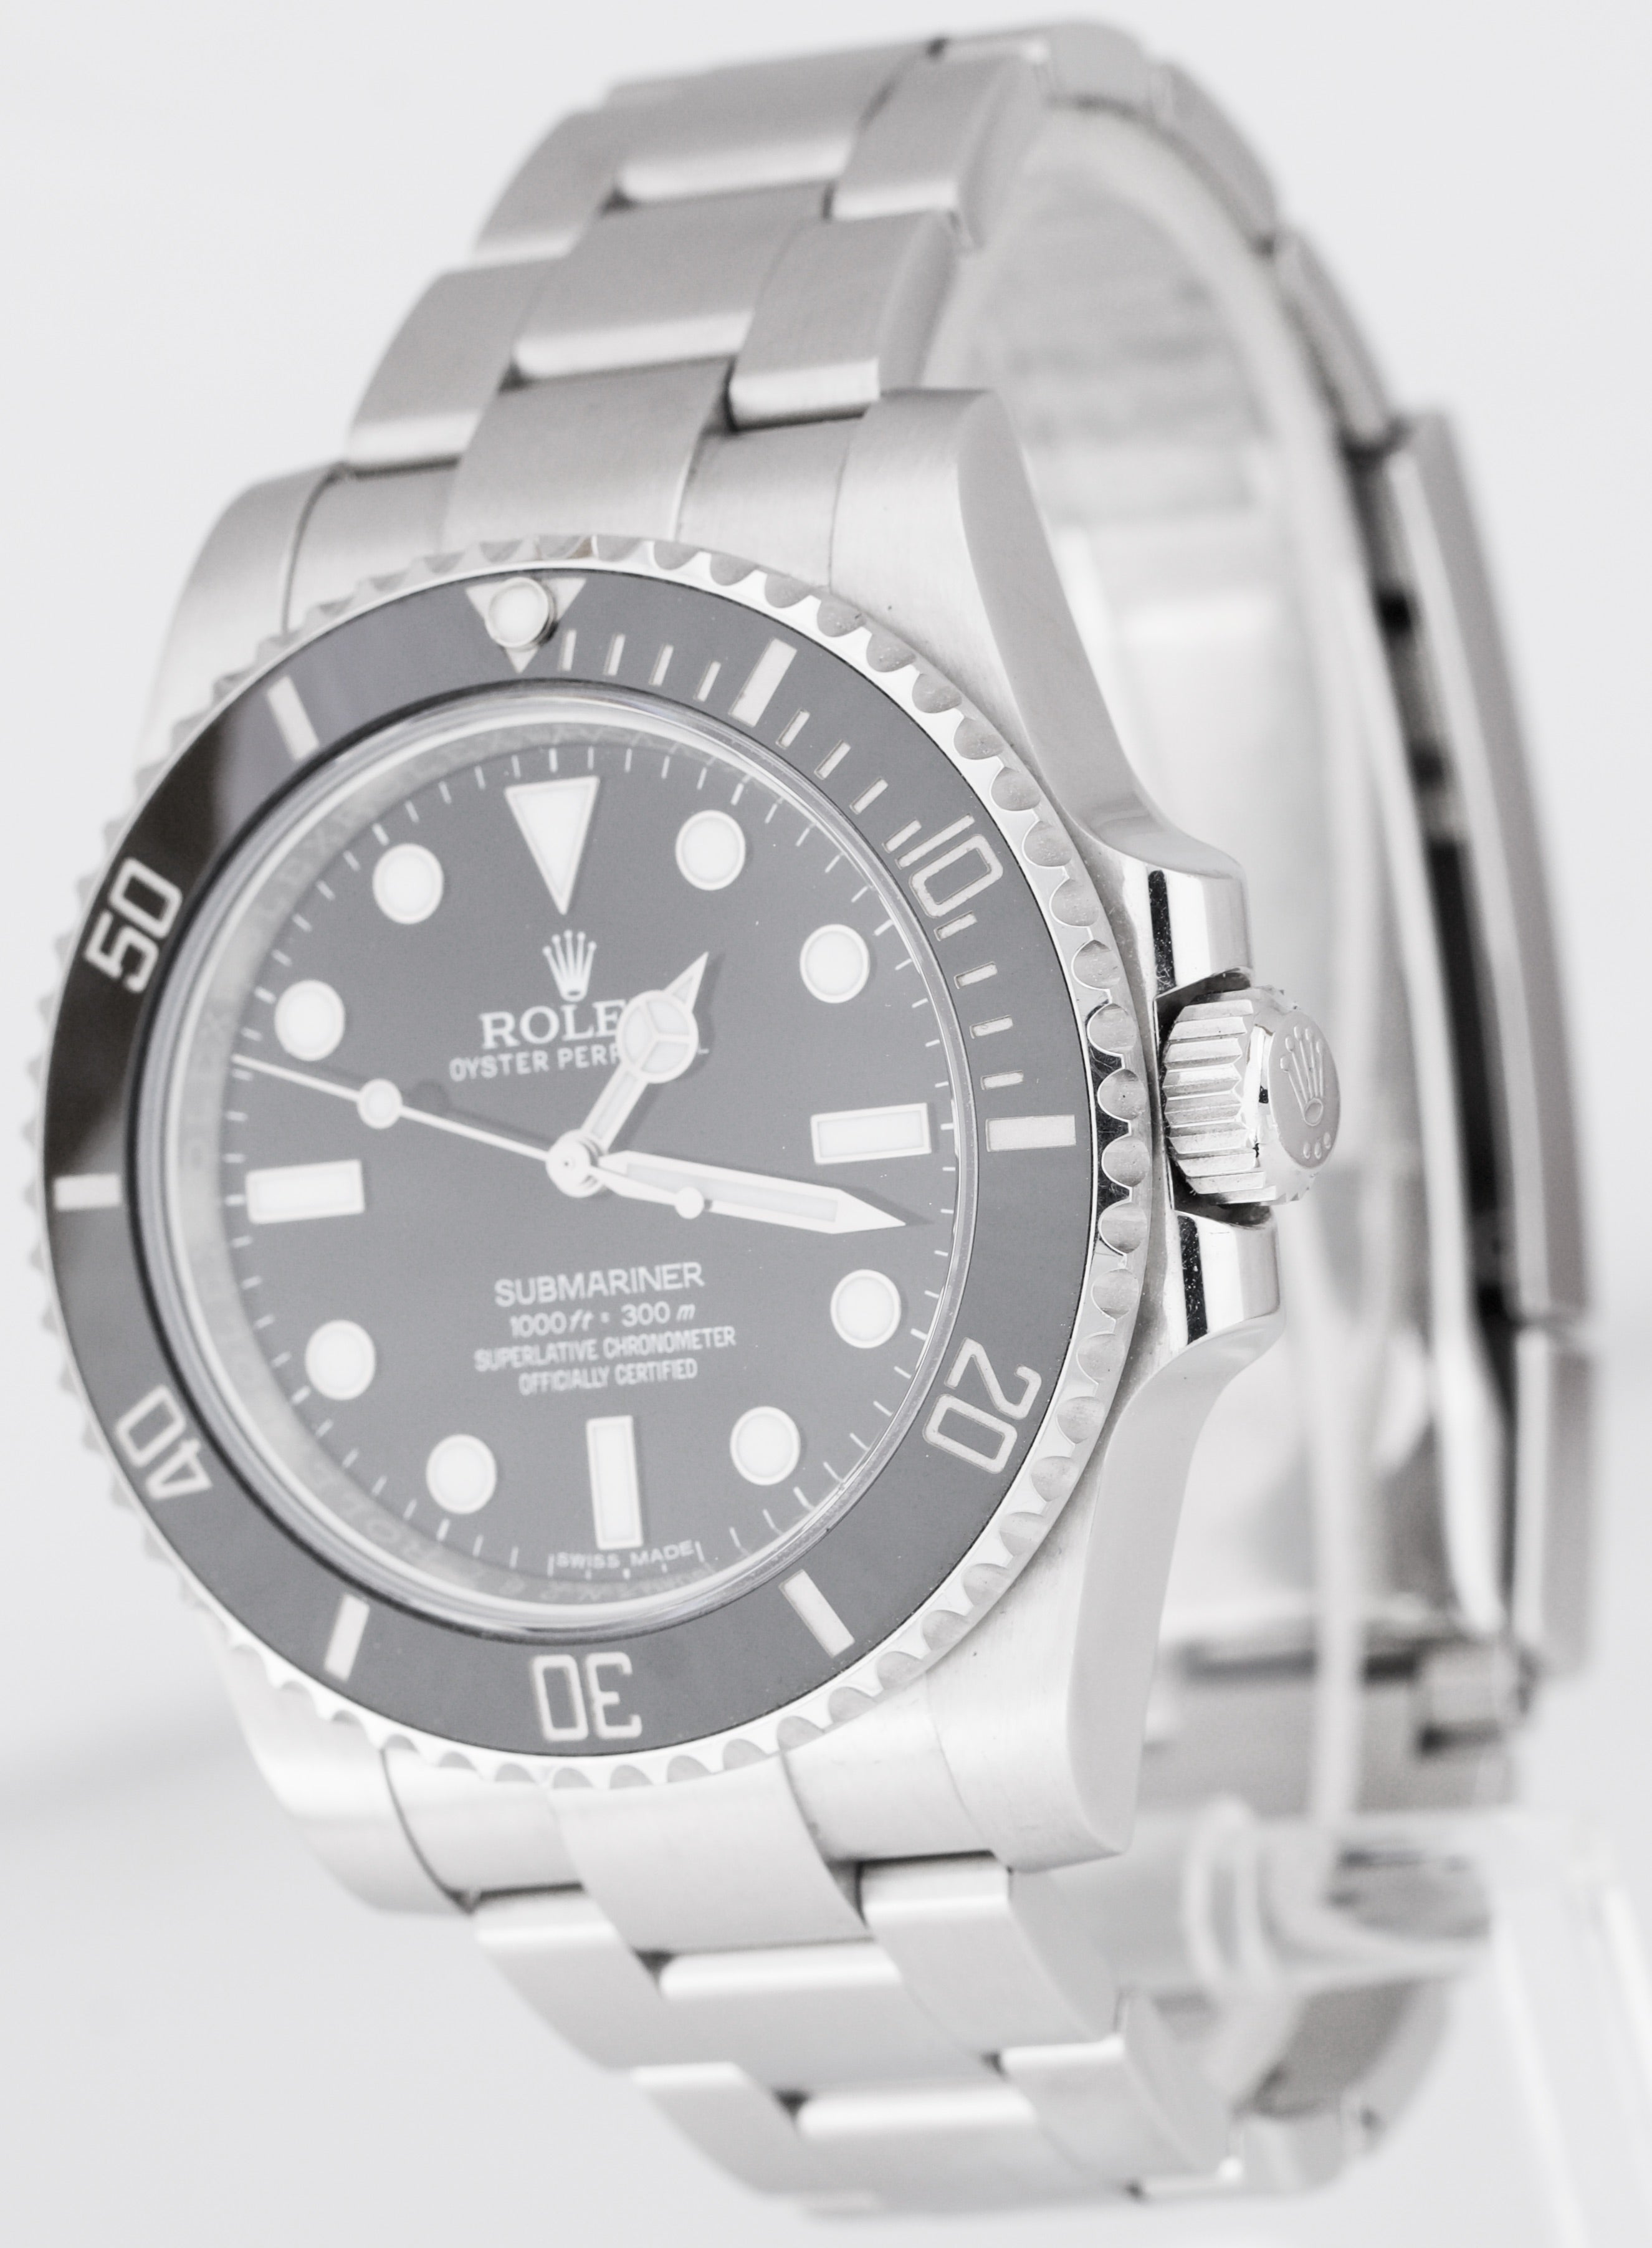 2019 UNPOLISHED Rolex Submariner No-Date Stainless Steel 40mm Watch 114060 B+P